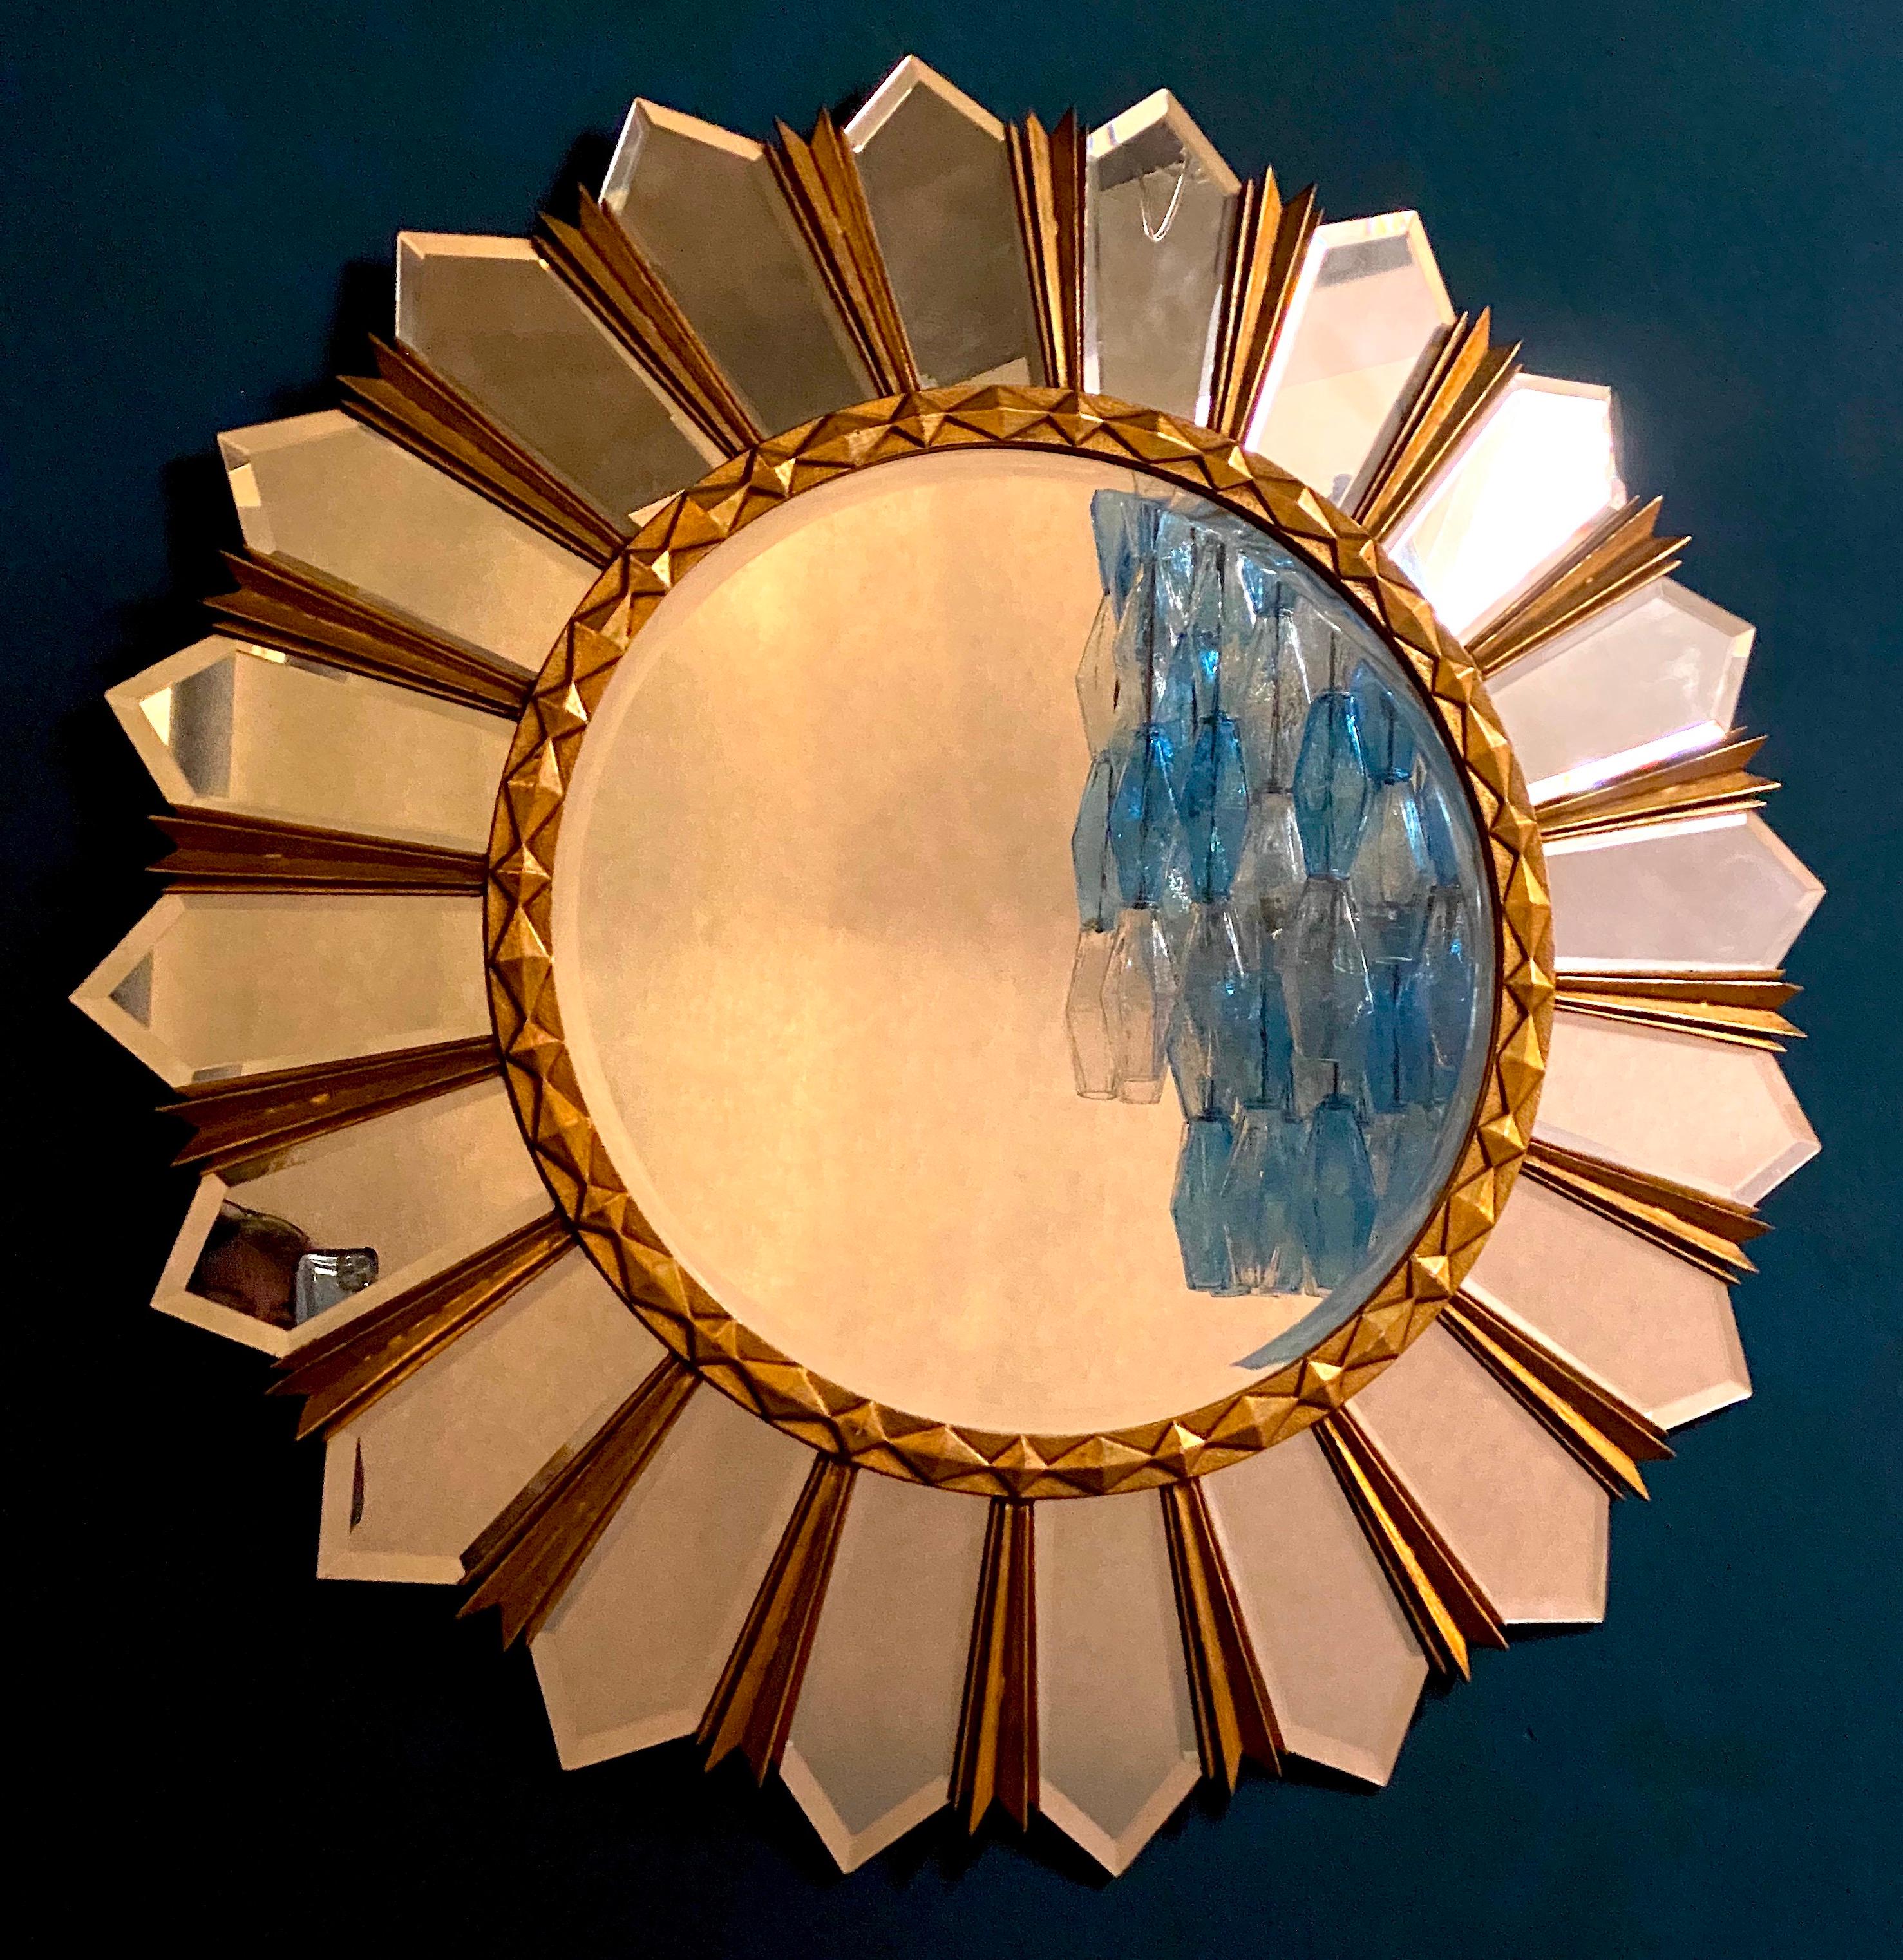 Beautiful gilt sunburst mirror, with a round mirrored glass center in moulded frame.
Measures: Diameter 100cm 
It is a reflection of something else, and has nothing to do with the mirror.
Perfect vintage condition.
       